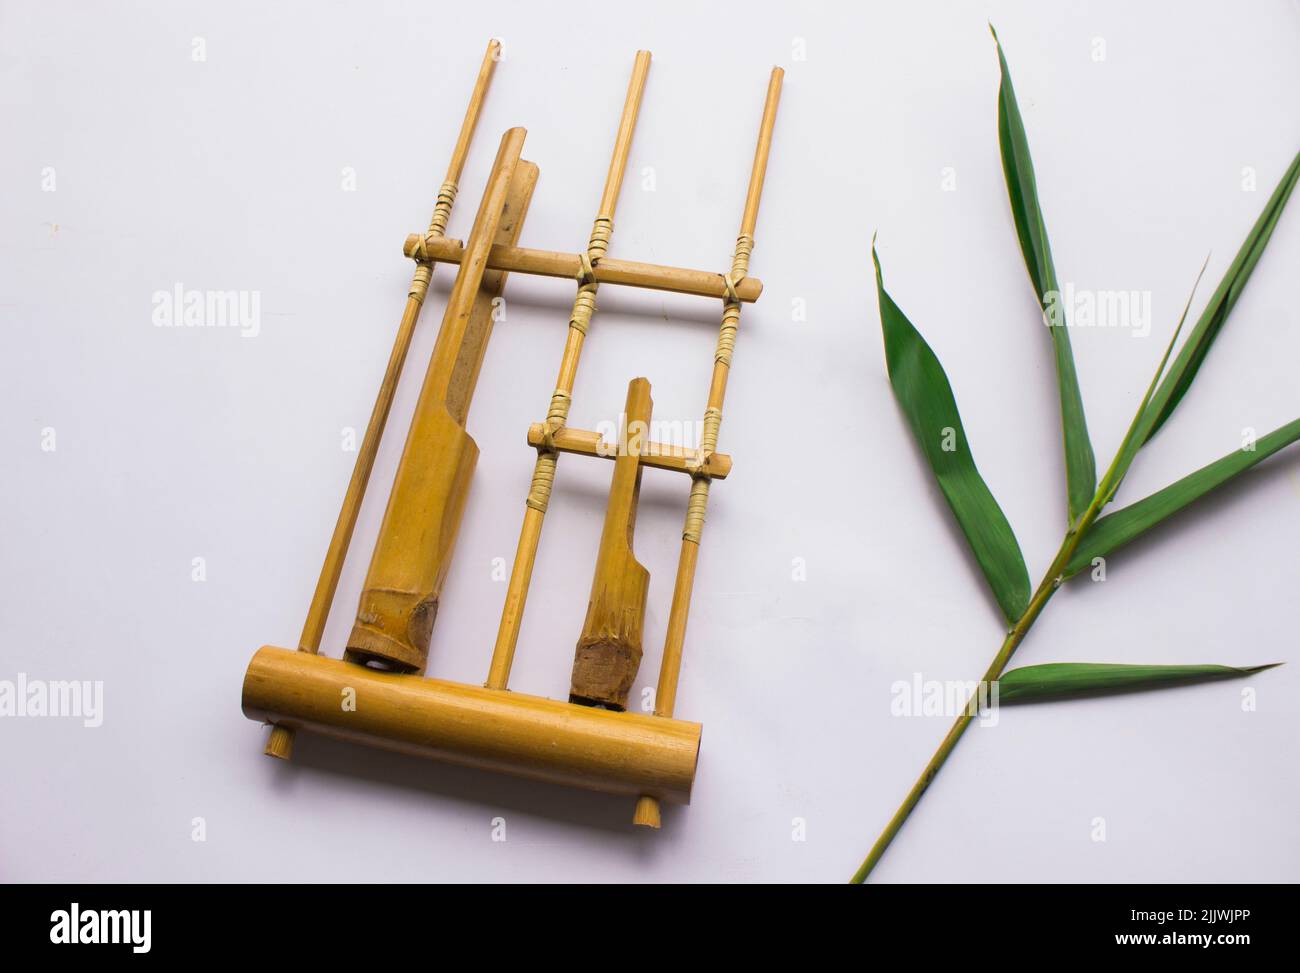 Angklung, the traditional sundanese musical instrument made from bamboo.  Isolated on white background Stock Photo - Alamy